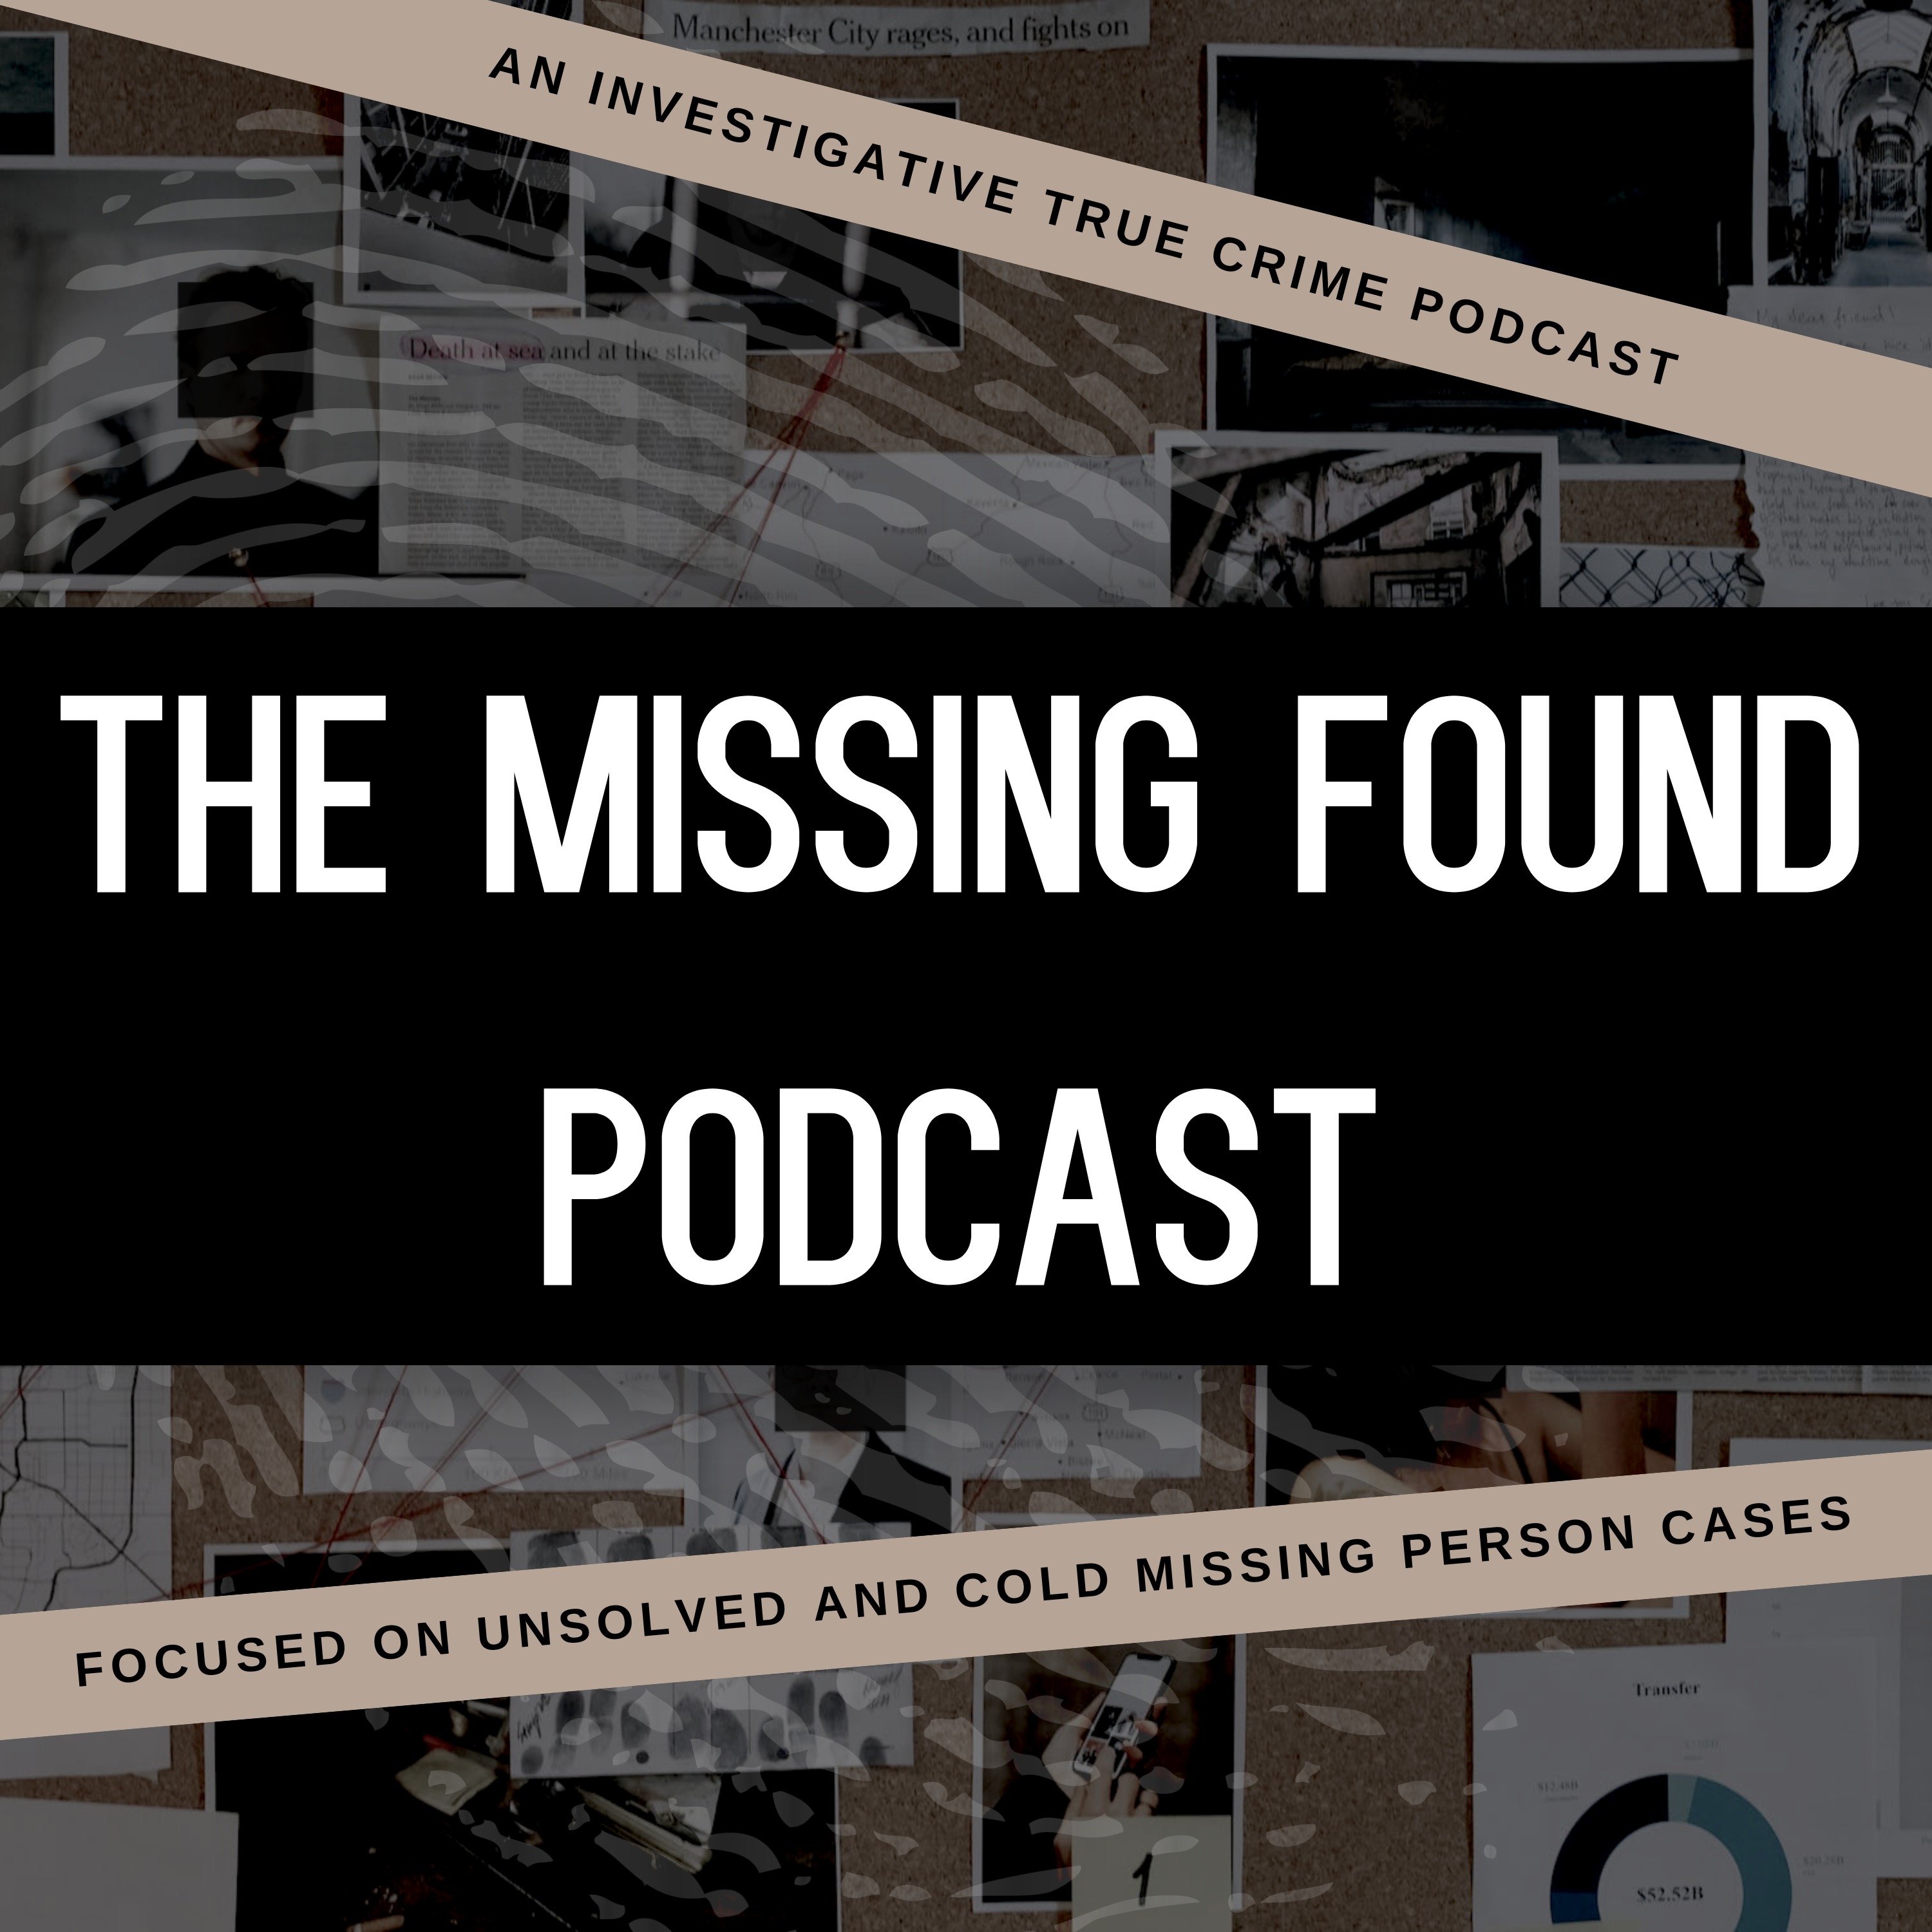 8 Ways on How Not to Become a Victim on Valentine's Day | The Missing Found Podcast